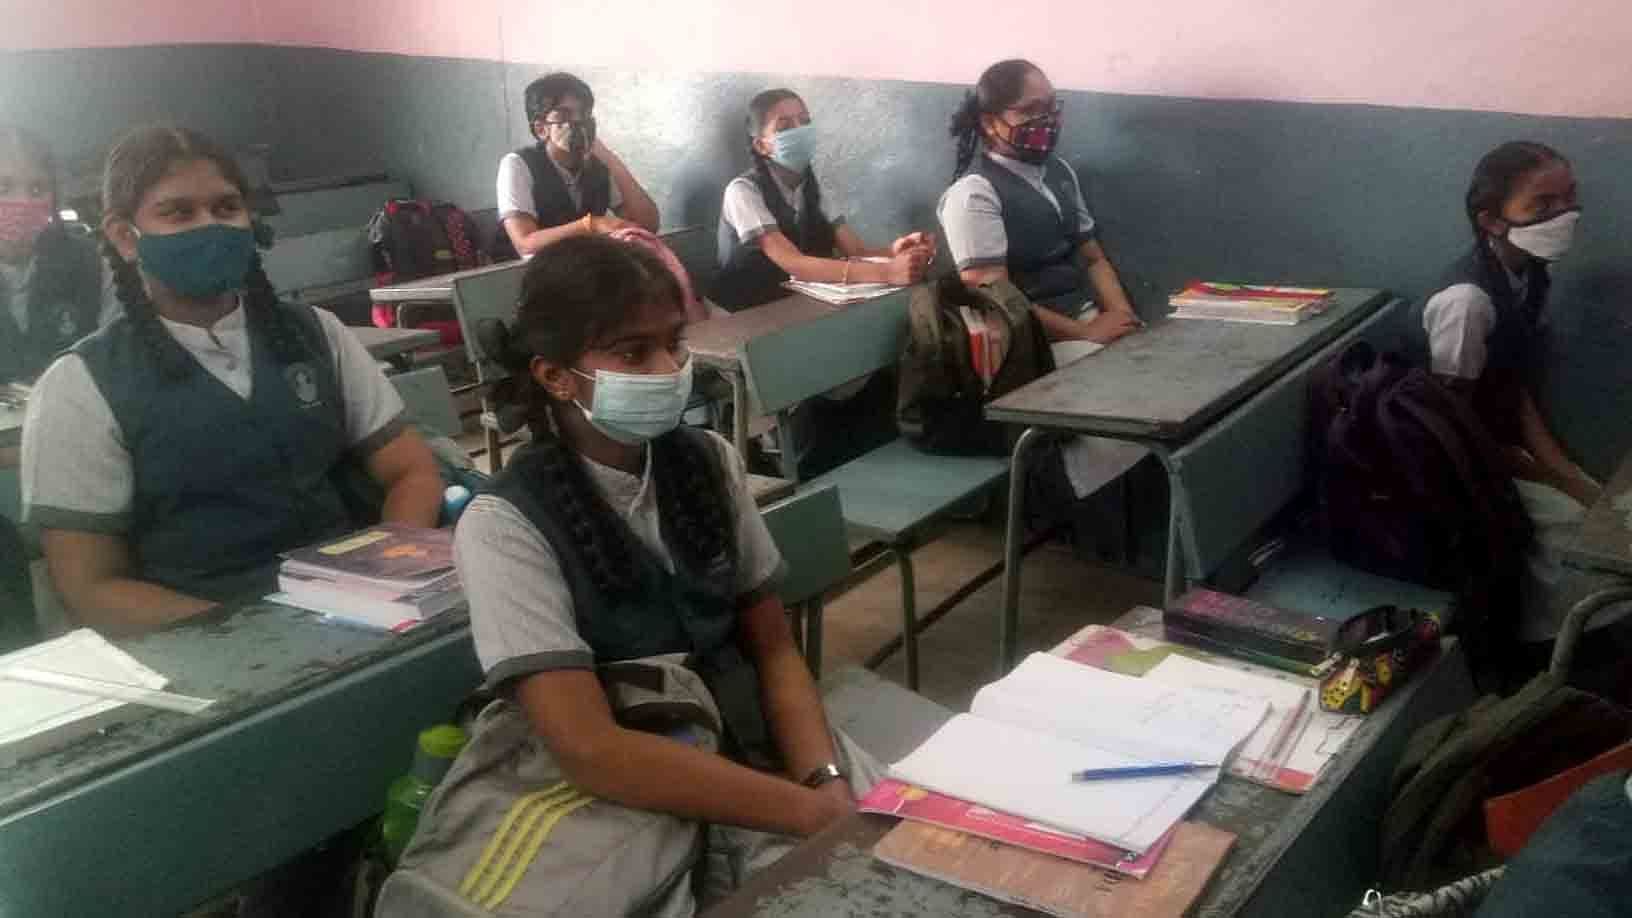 Schools in UP and MP to remain shut for Classes 1-8 till 4 and 15 April respectively.